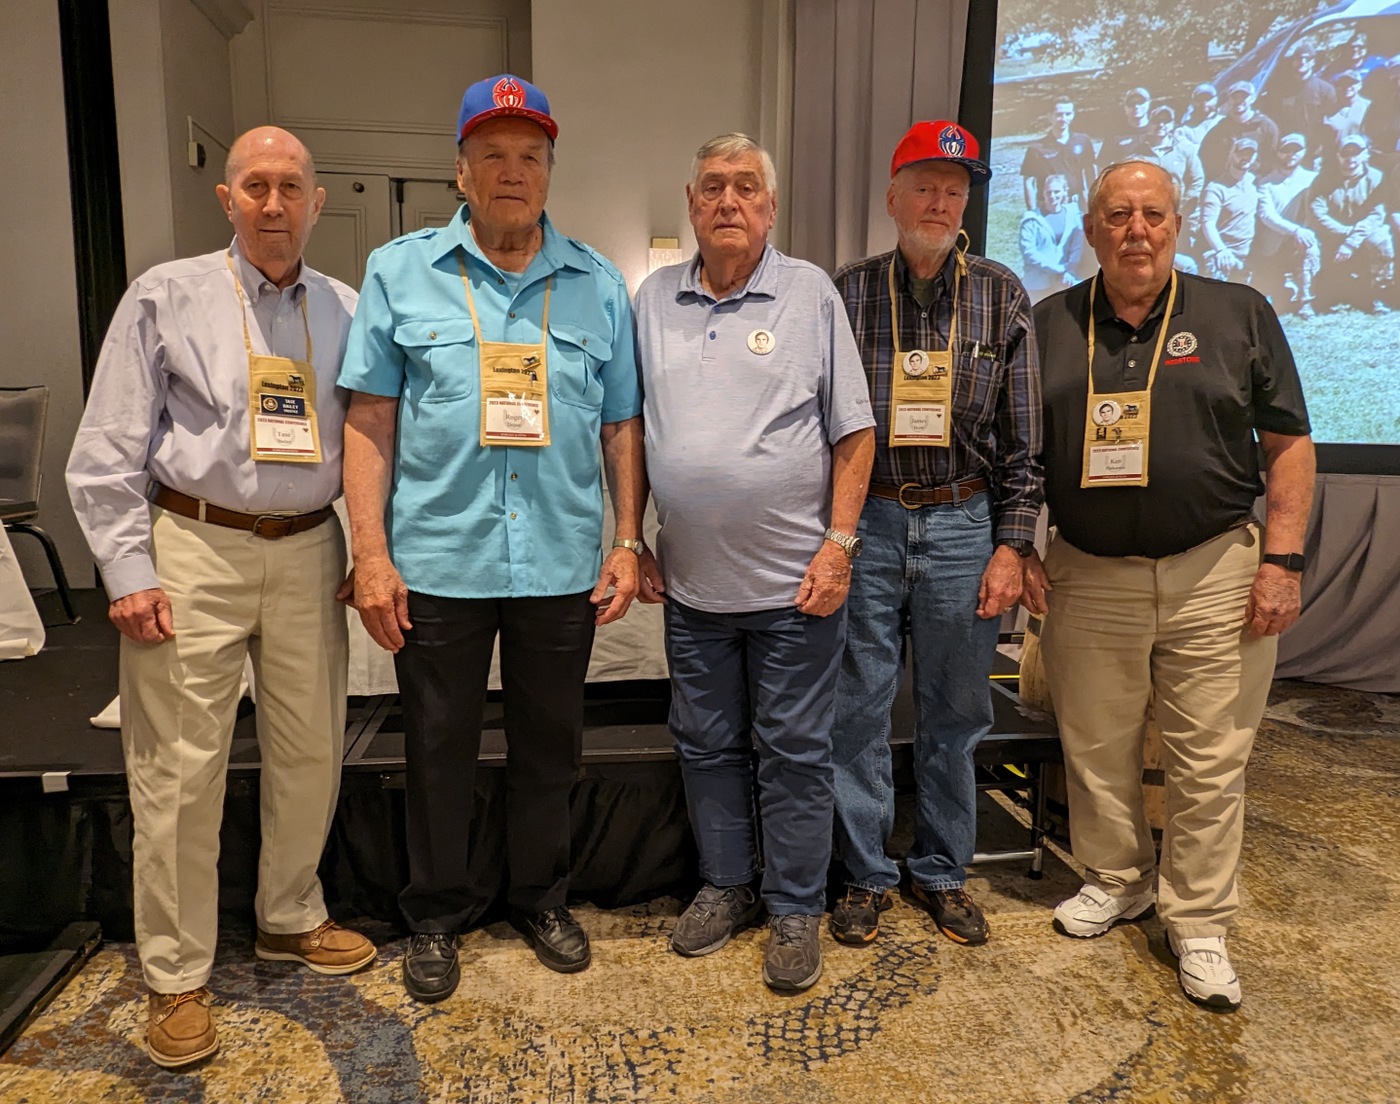 SWAT operators Tase Bailey, Roger DePue, Jim Huggins, Jim Horn, and Ken Parkerson during a Society of Former Agents of the FBI gathering in 2023 in Lexington, Kentucky. The first SWAT teams called themselves Spider One.